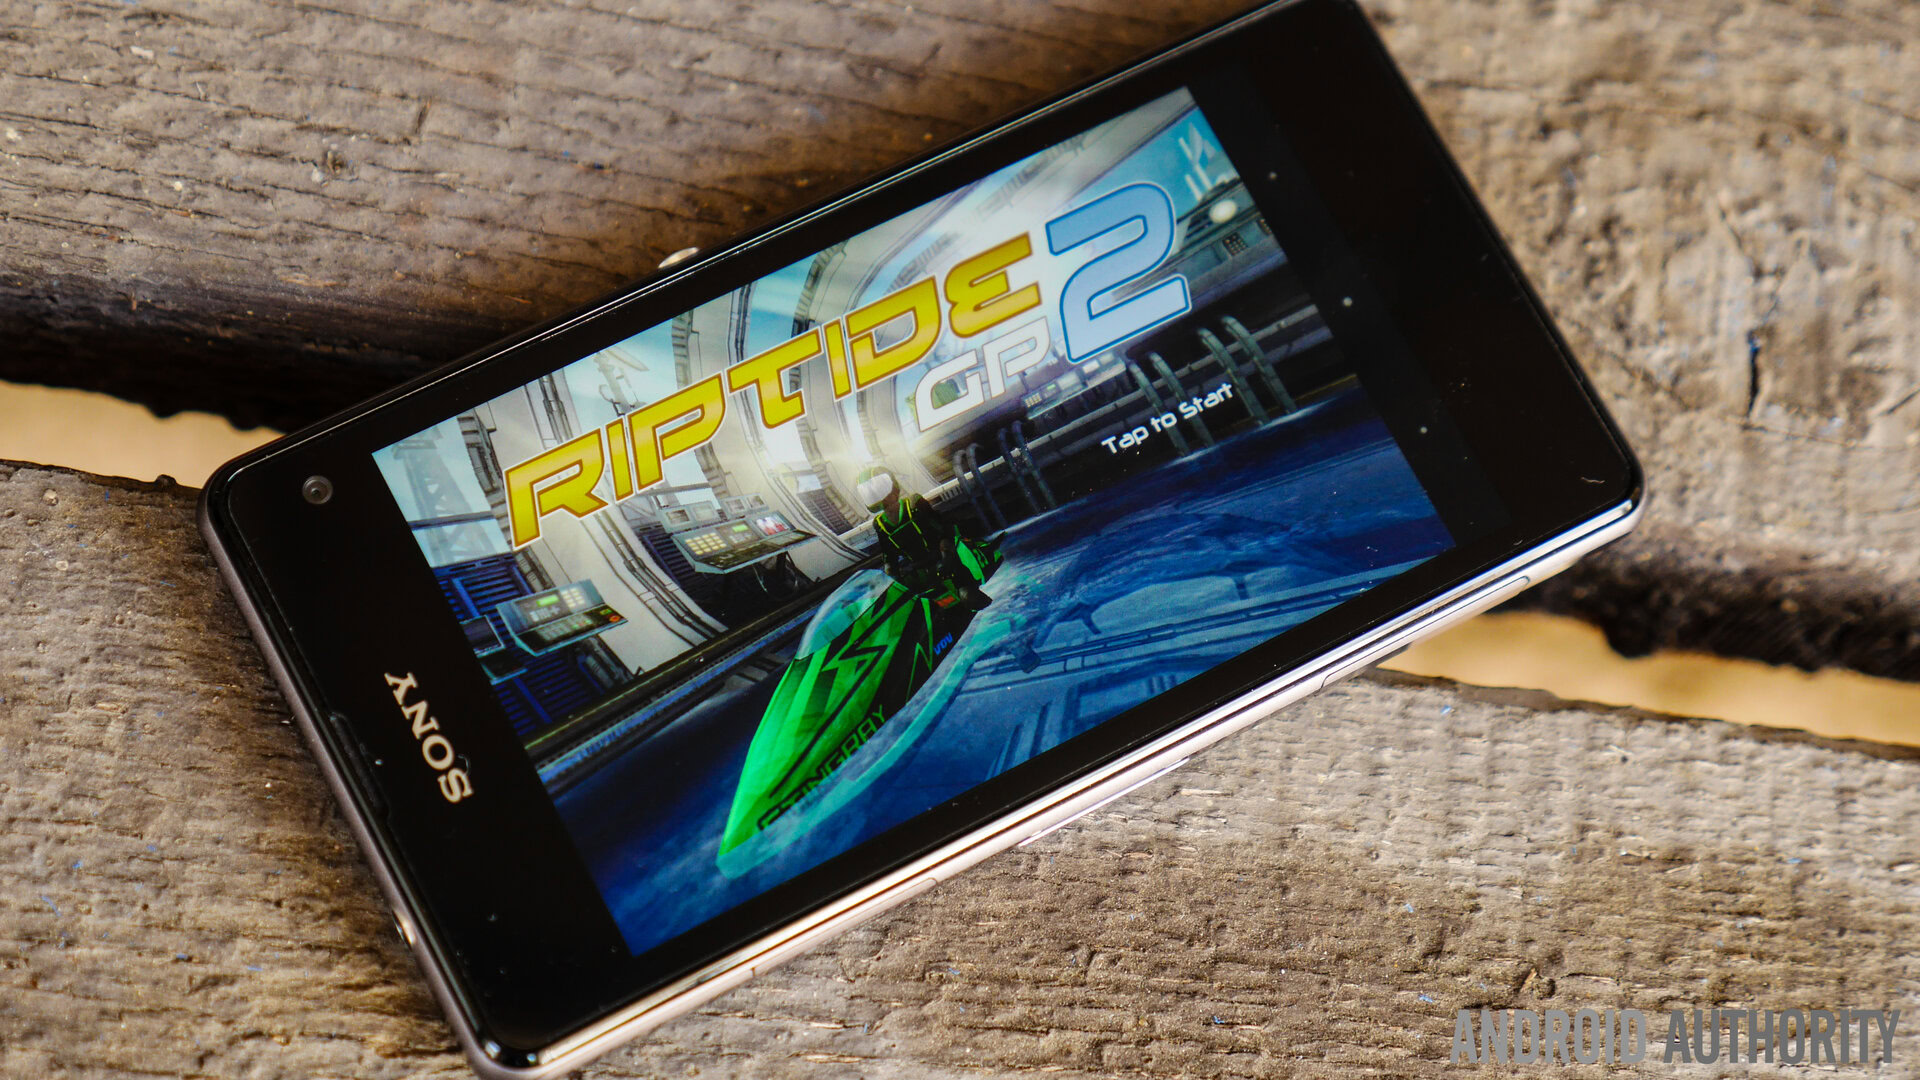 Sony Xperia Z1 Compact Authority